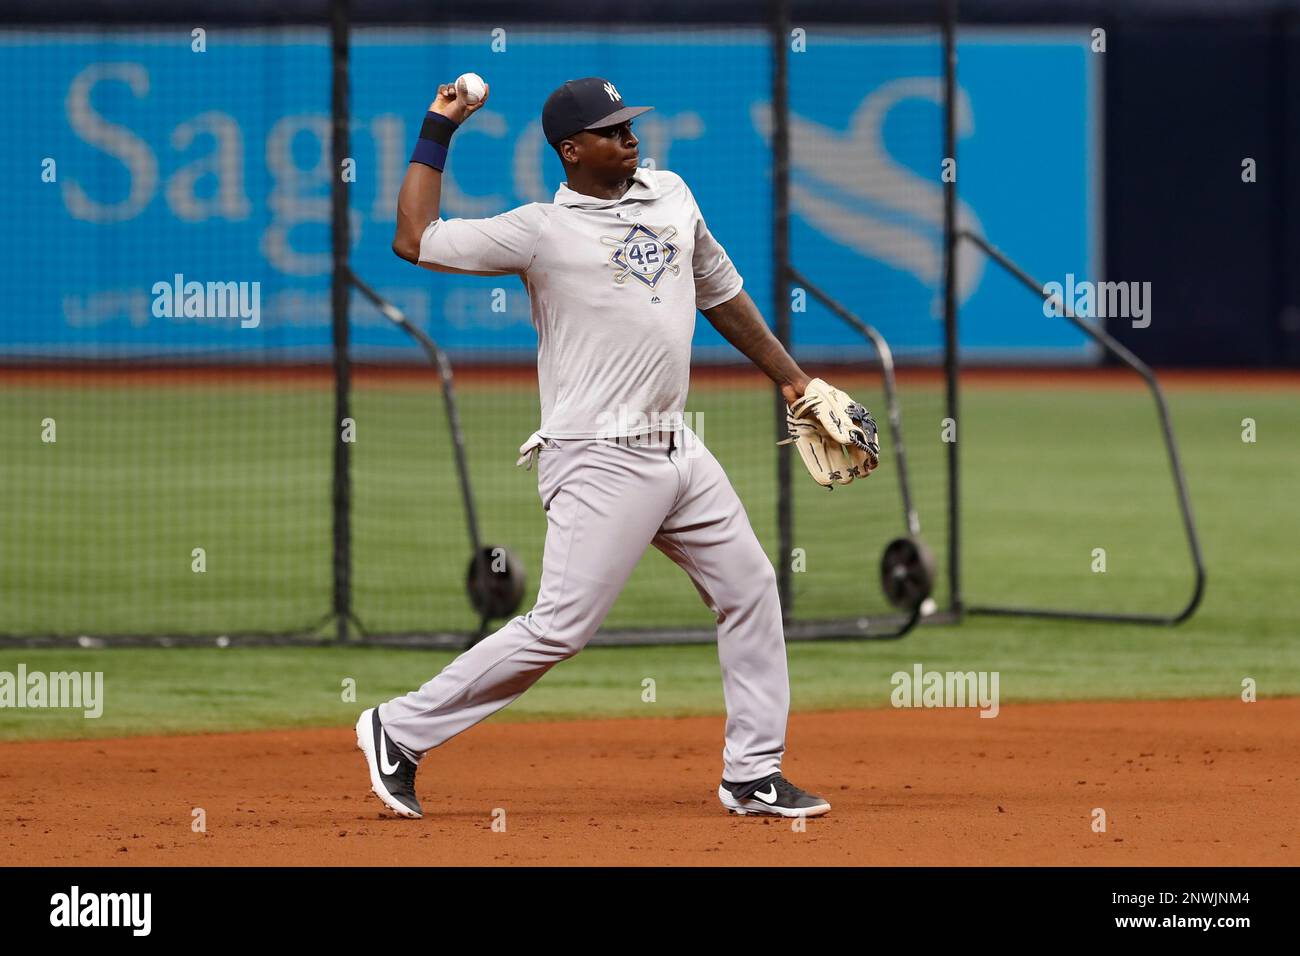 ST. PETERSBURG, FL - SEPTEMBER 27: New York Yankees shortstop Didi Gregorius (18) takes ground balls before the regular season MLB game between the New York Yankees and Tampa Bay Rays on September 27, 2018 at Tropicana Field in St. Petersburg, FL. (Photo by Mark LoMoglio/Icon Sportswire) (Icon Sportswire via AP Images) Stock Photo